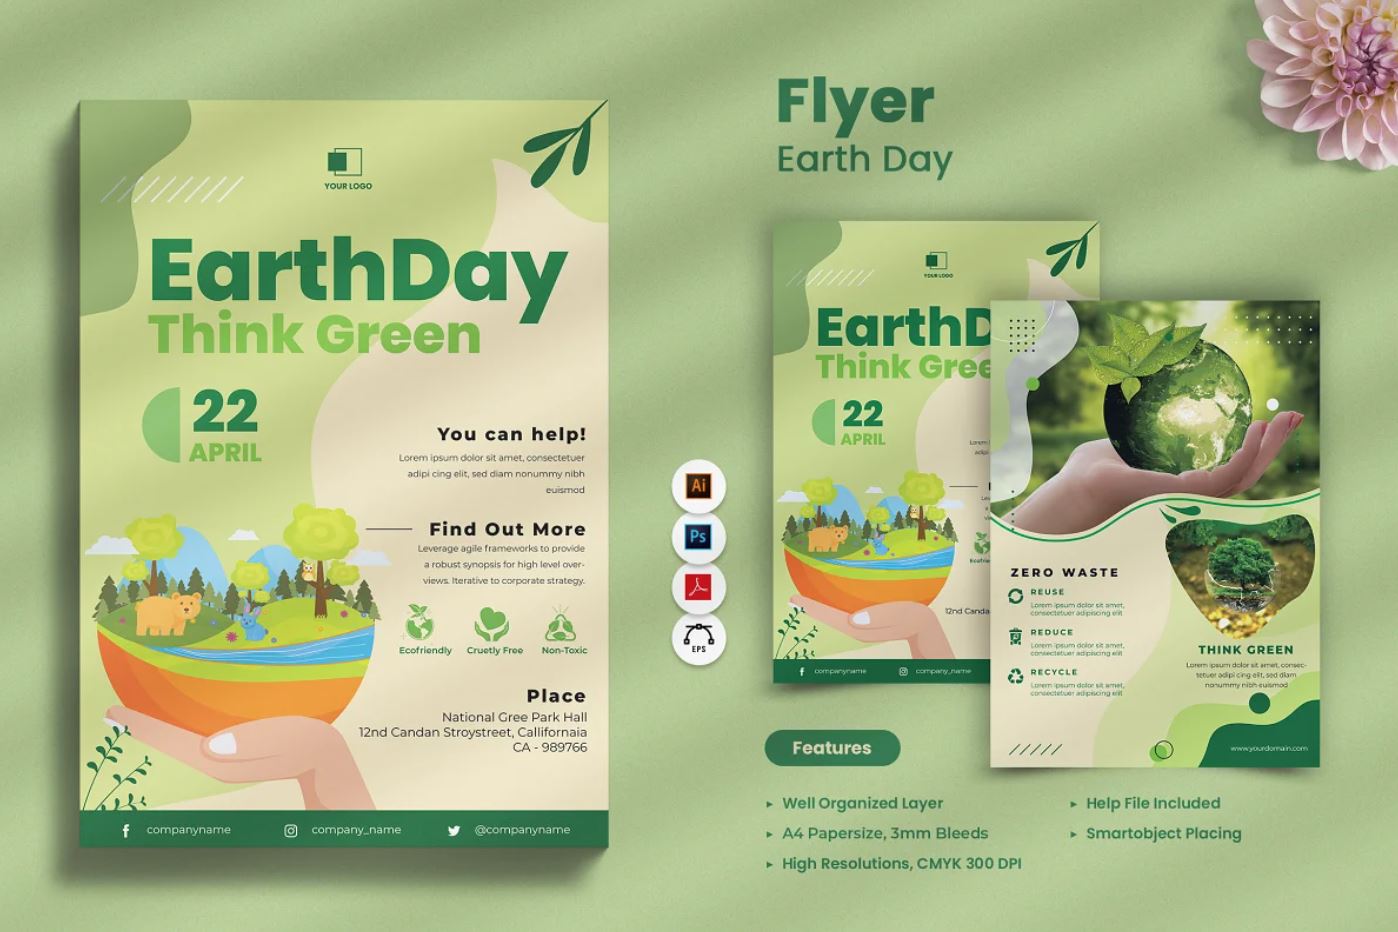 Earth-Day-event-flyer